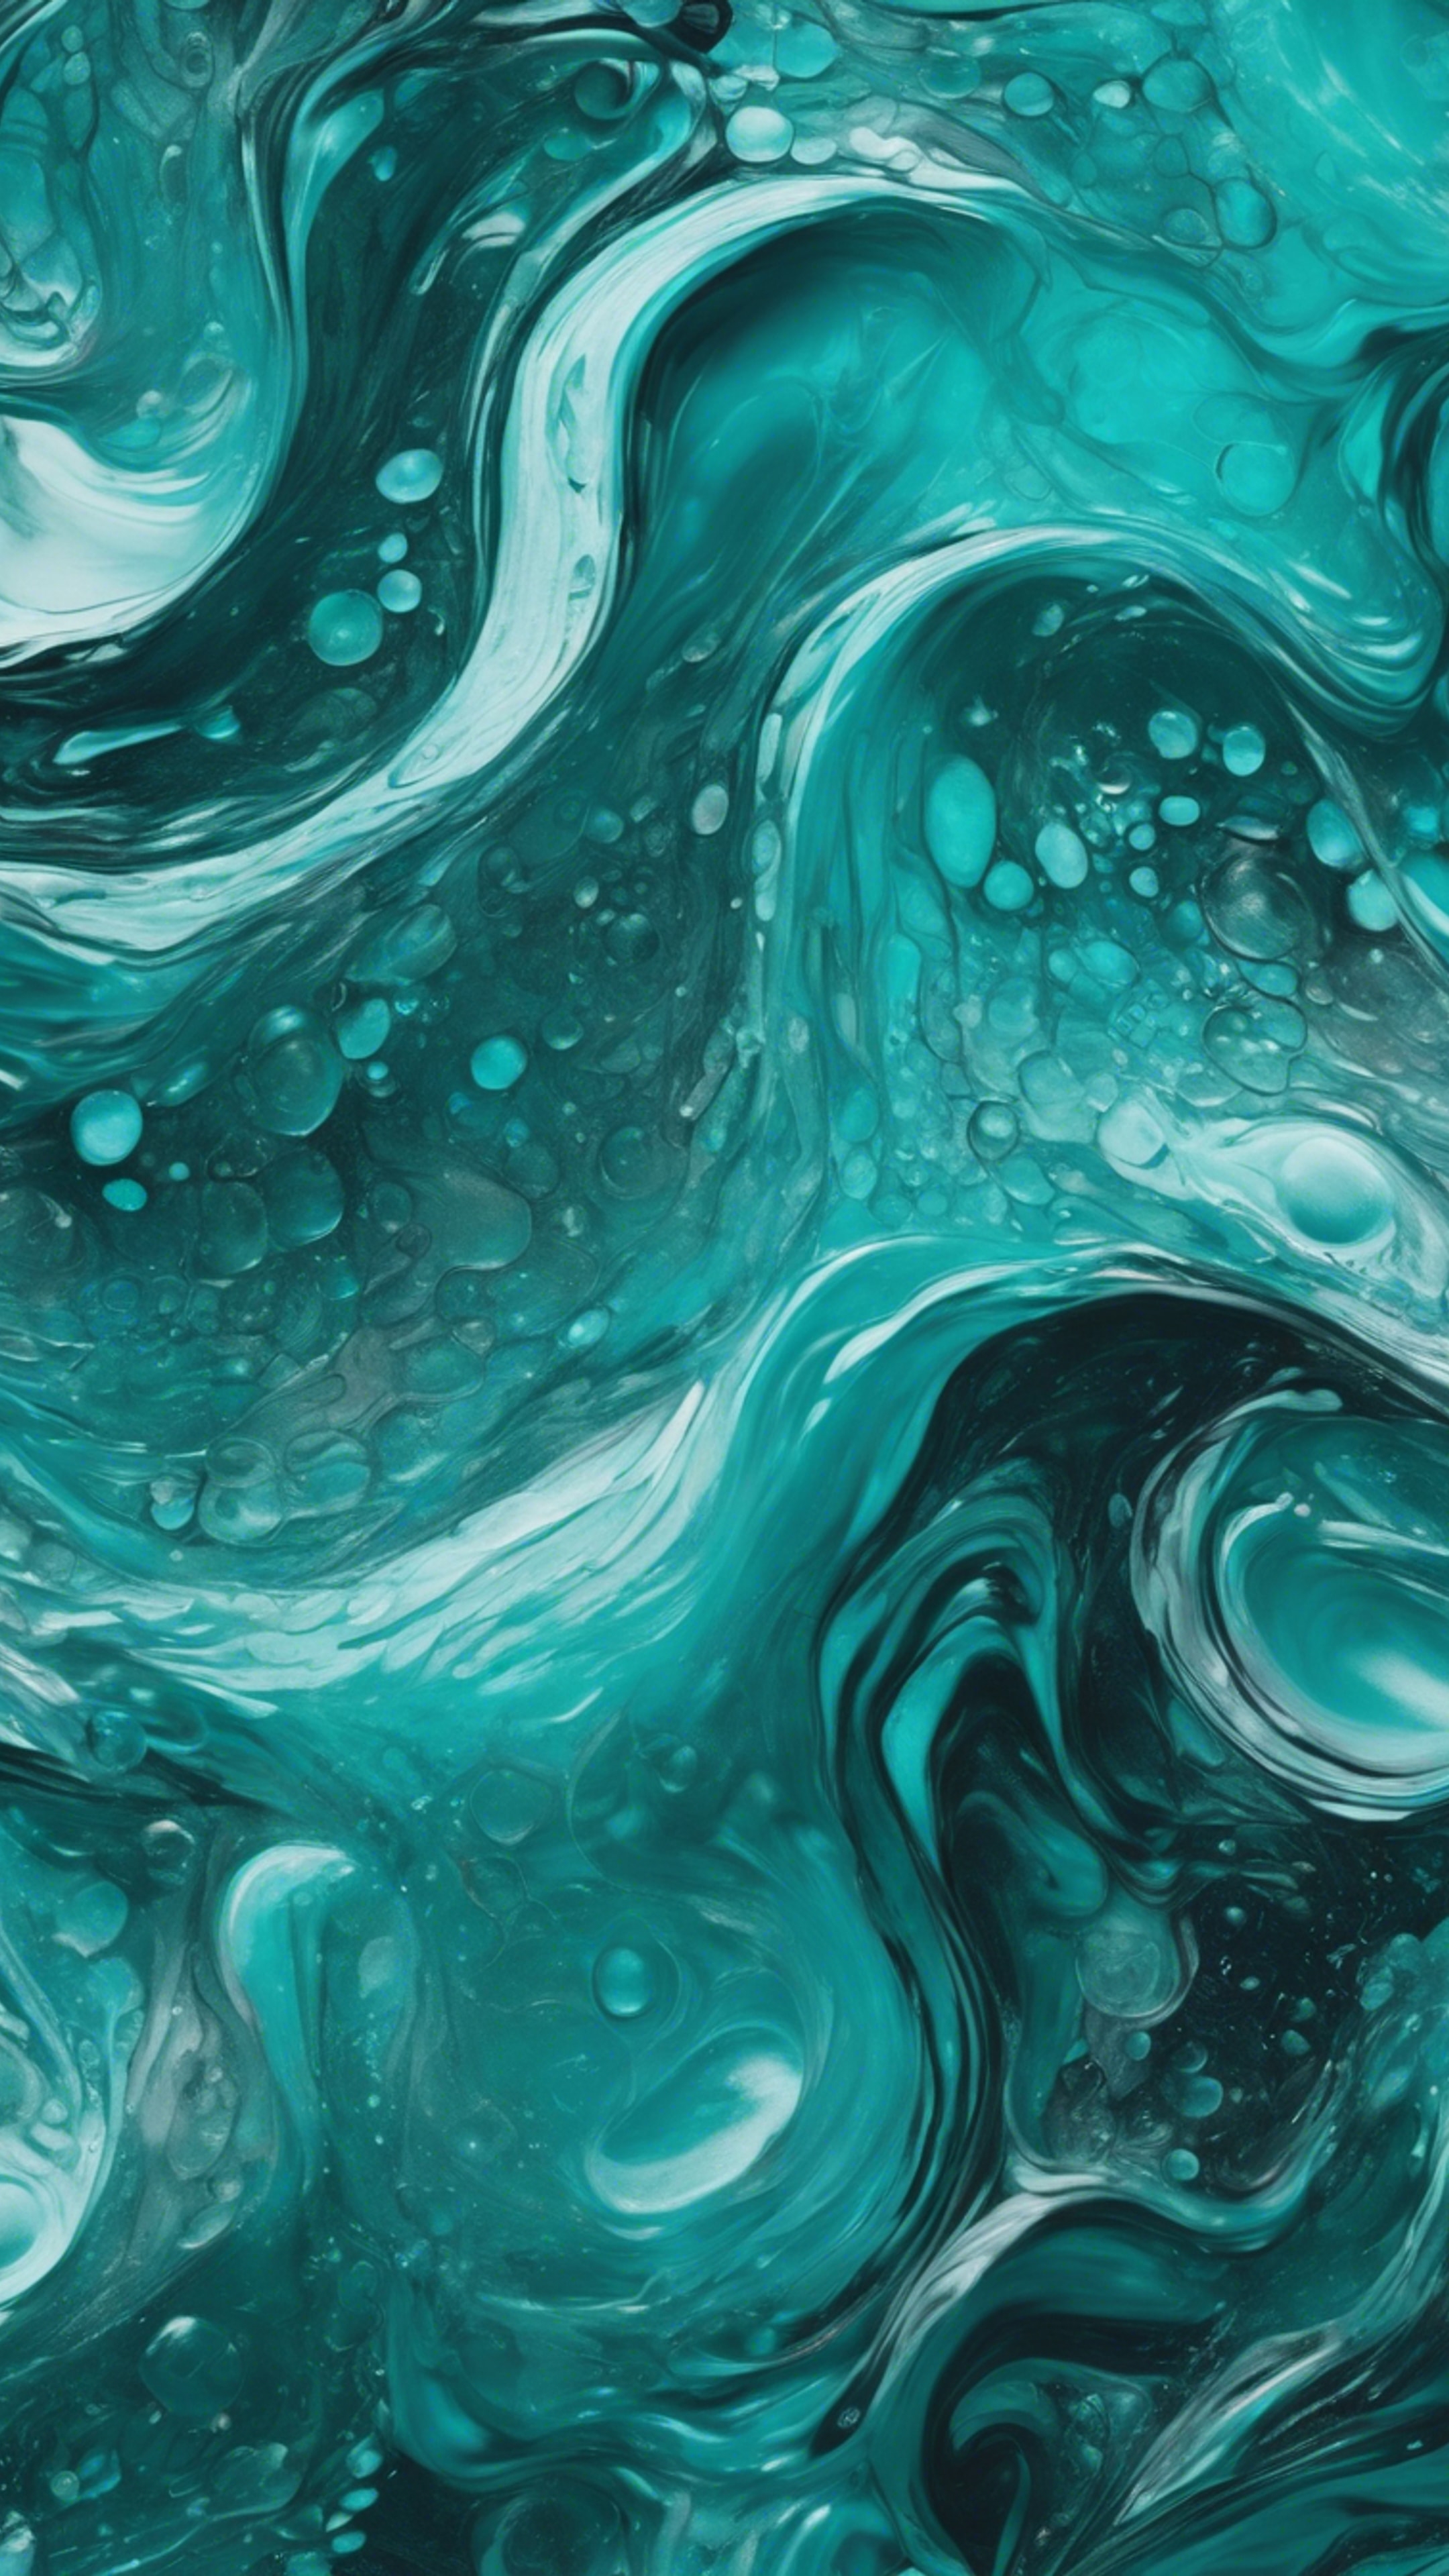 Abstract painting with swirling waves of shades of cool teal.壁紙[053c1b1ade8044ef8a45]